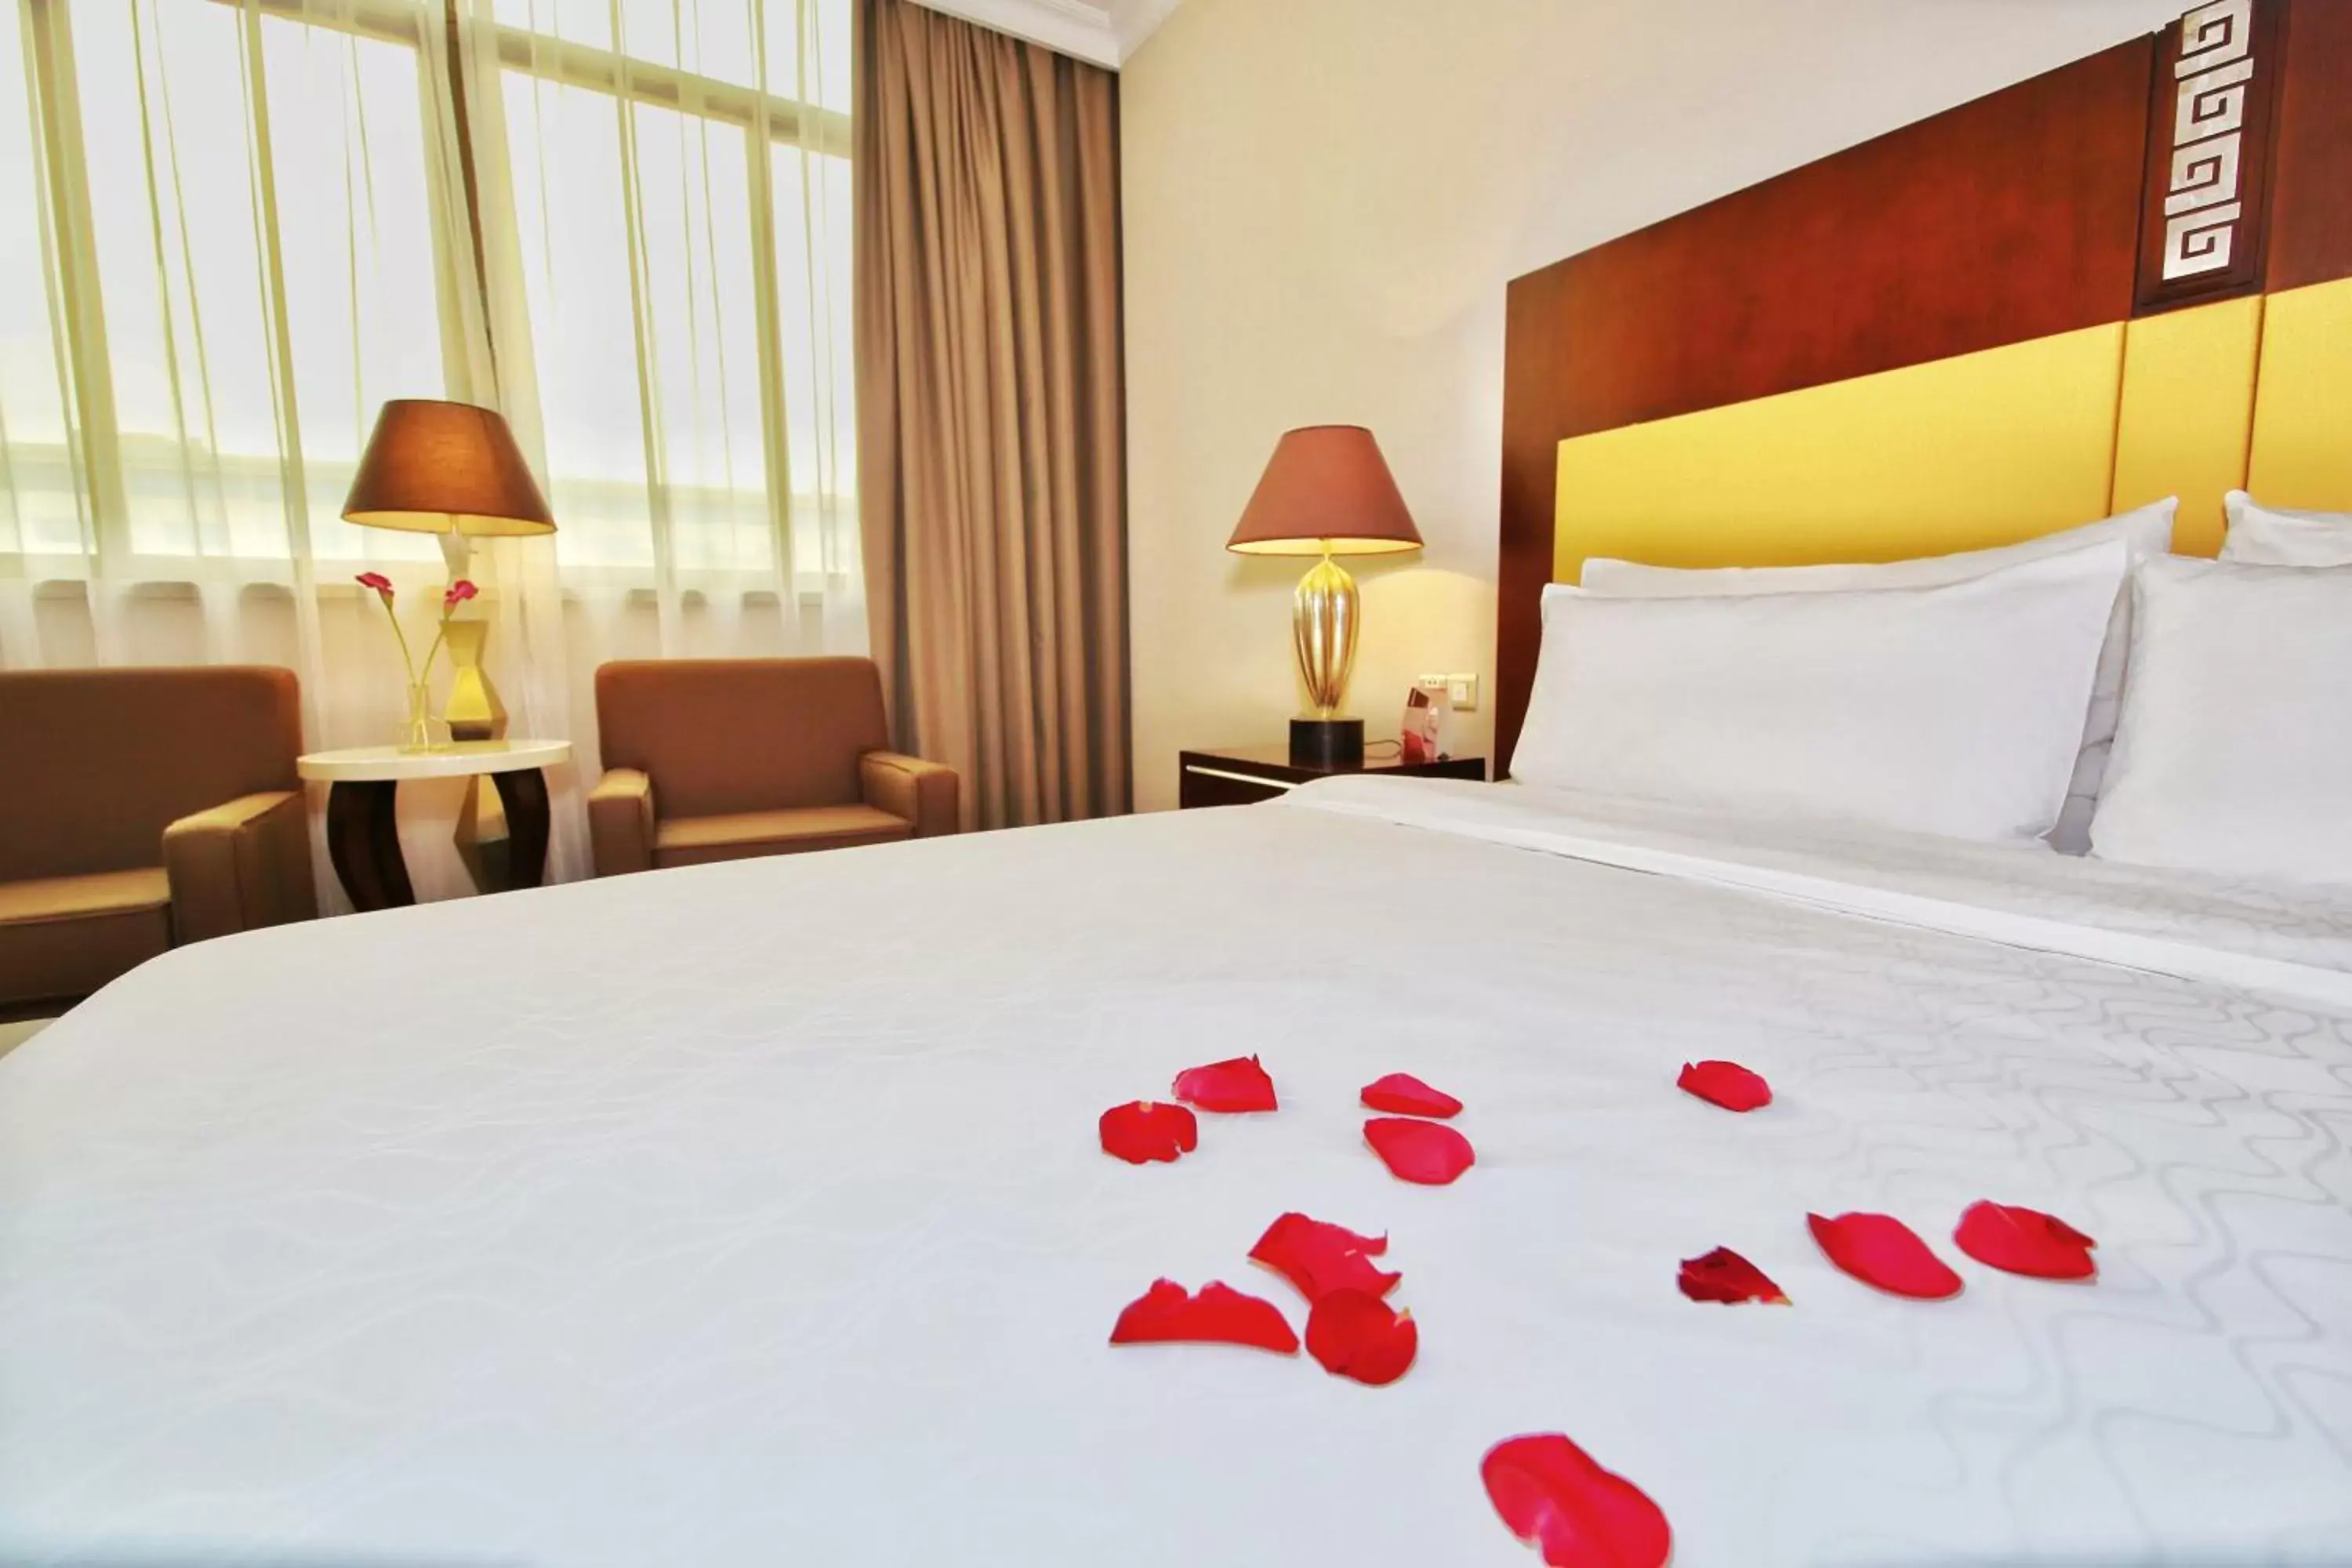 Bed in Dong Fang Hotel Guangzhou, Canton Fair Free Shuttle Bus, Canton Fair Buyer Official Registration